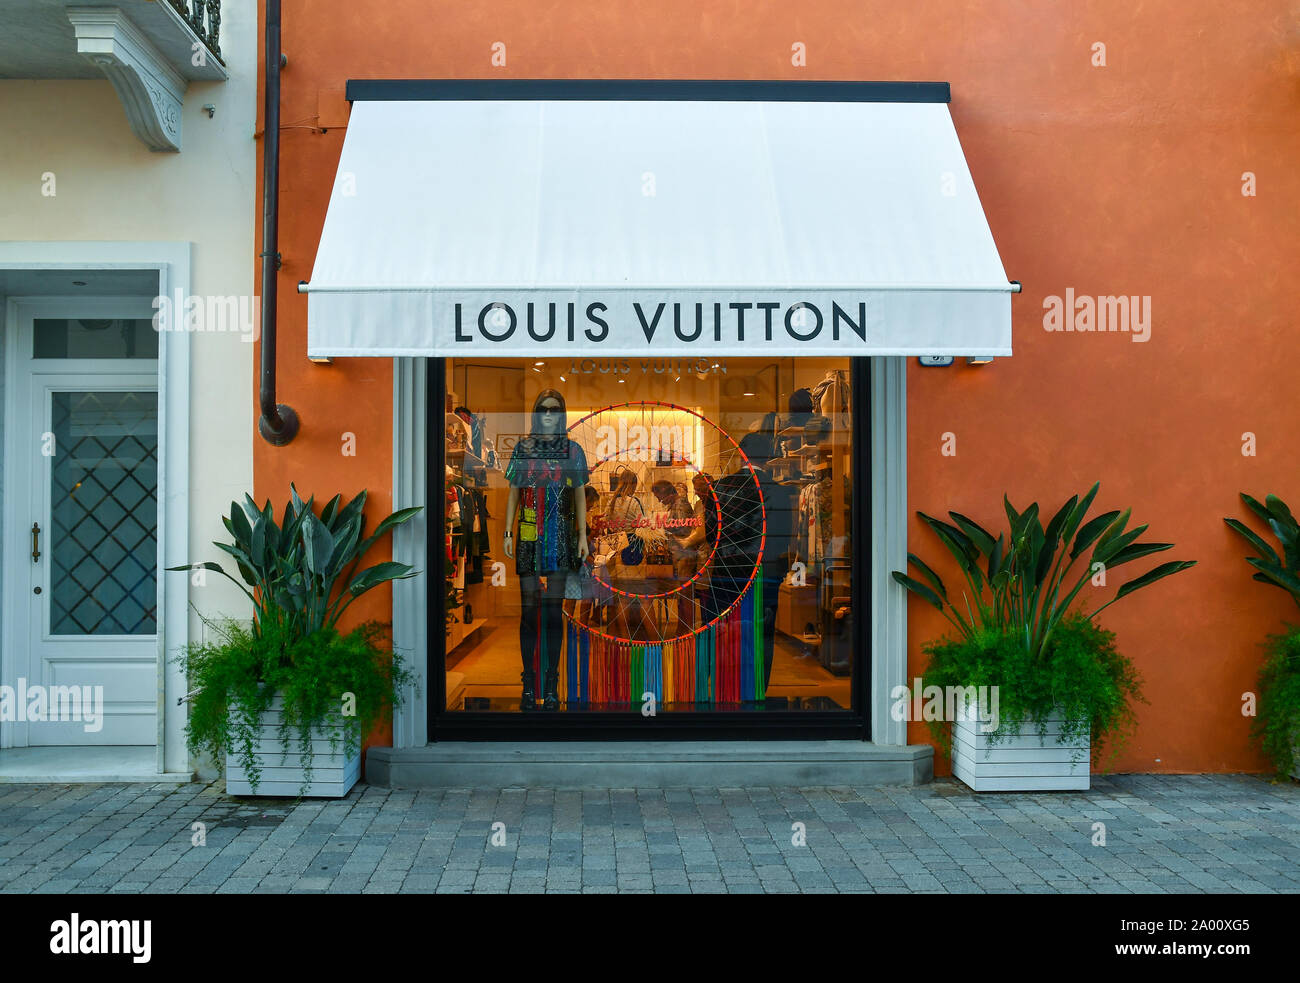 Louis Vuitton to open new leather goods factory in Tuscany